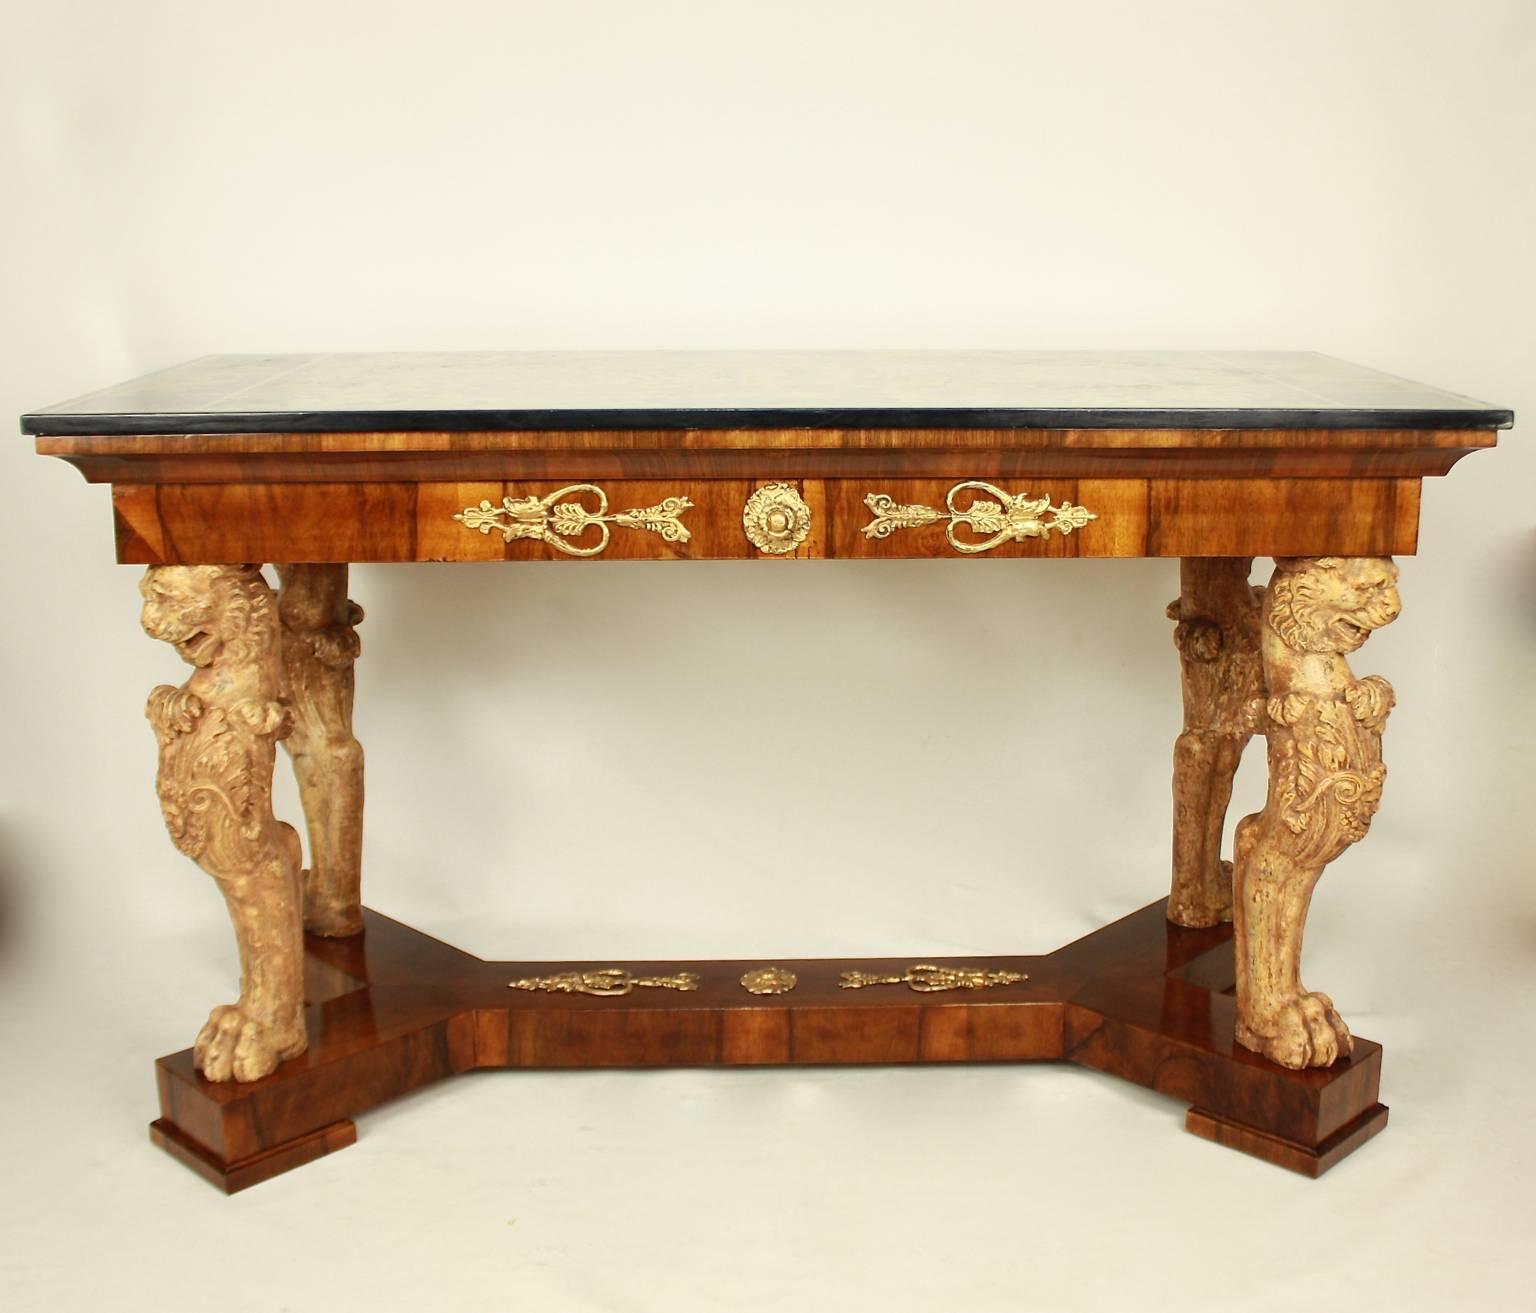 Early 18th Century North Italian Center Table with Scagliola Top, dated 1721